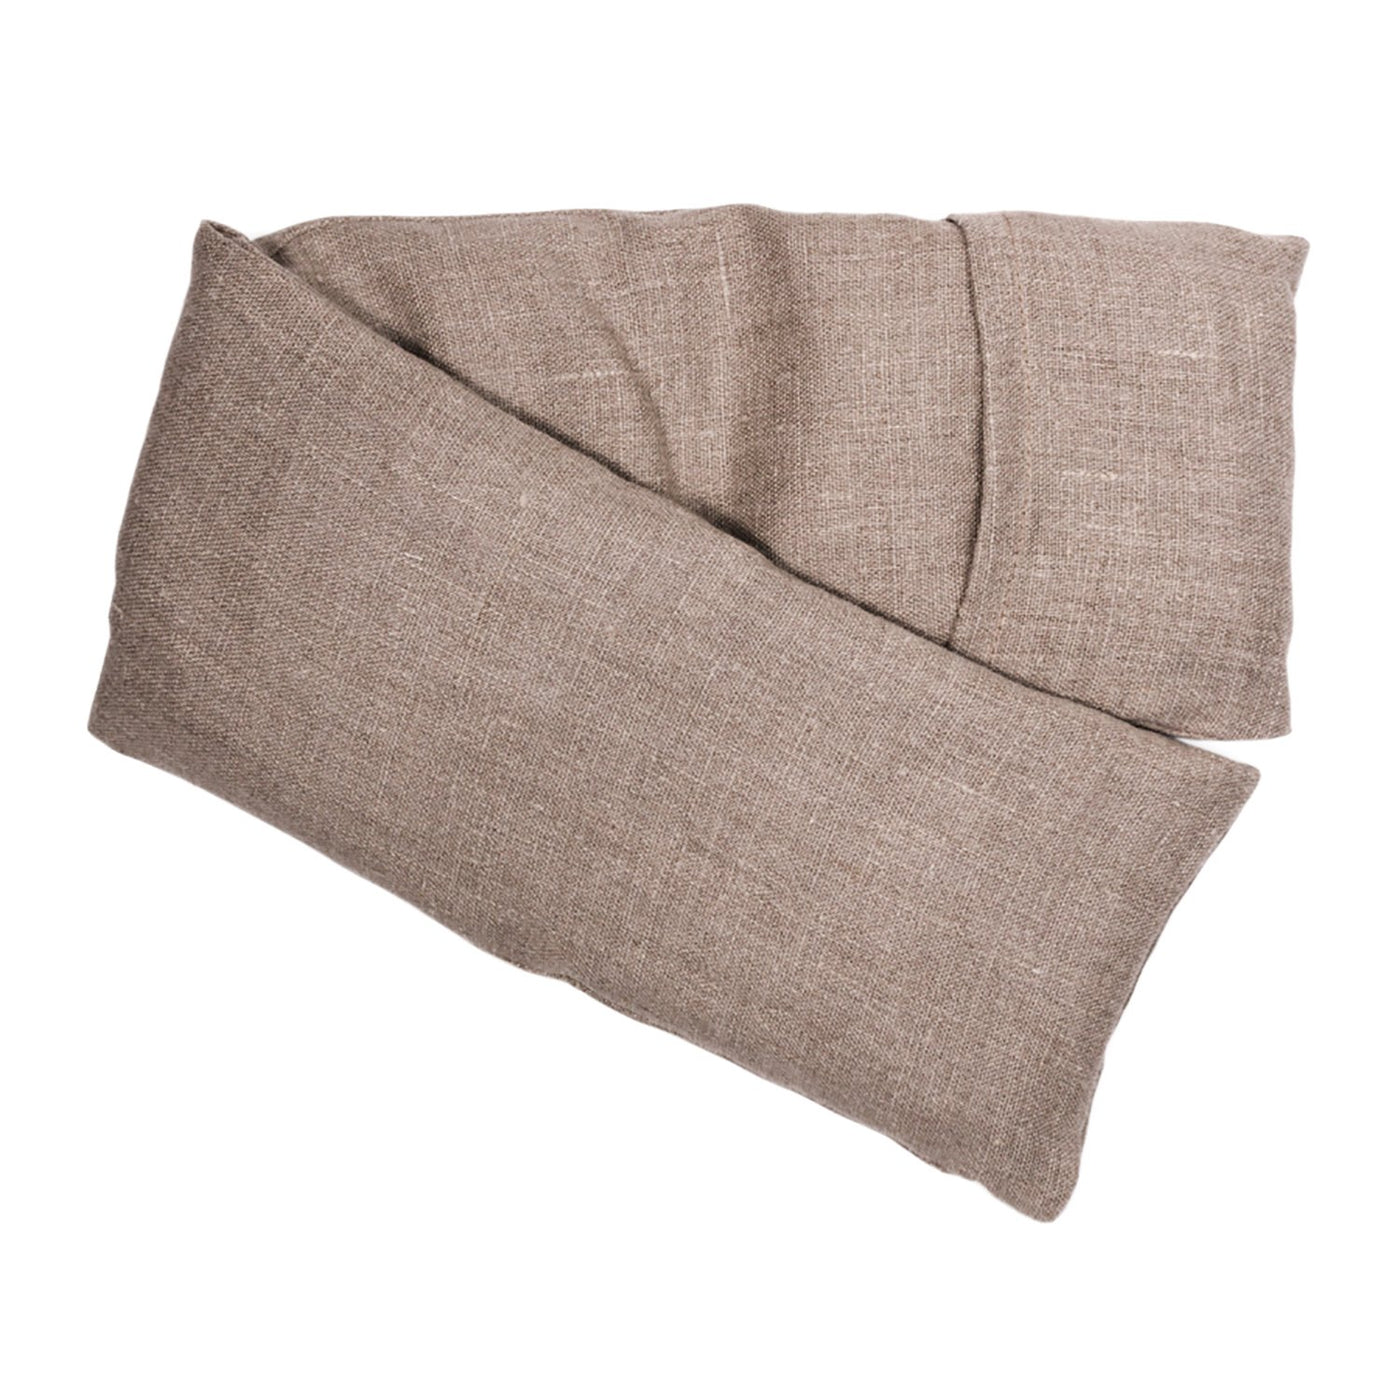 ELIZABETH W HOT/COLD FLAXSEED PACK WASHED LINEN NATURAL